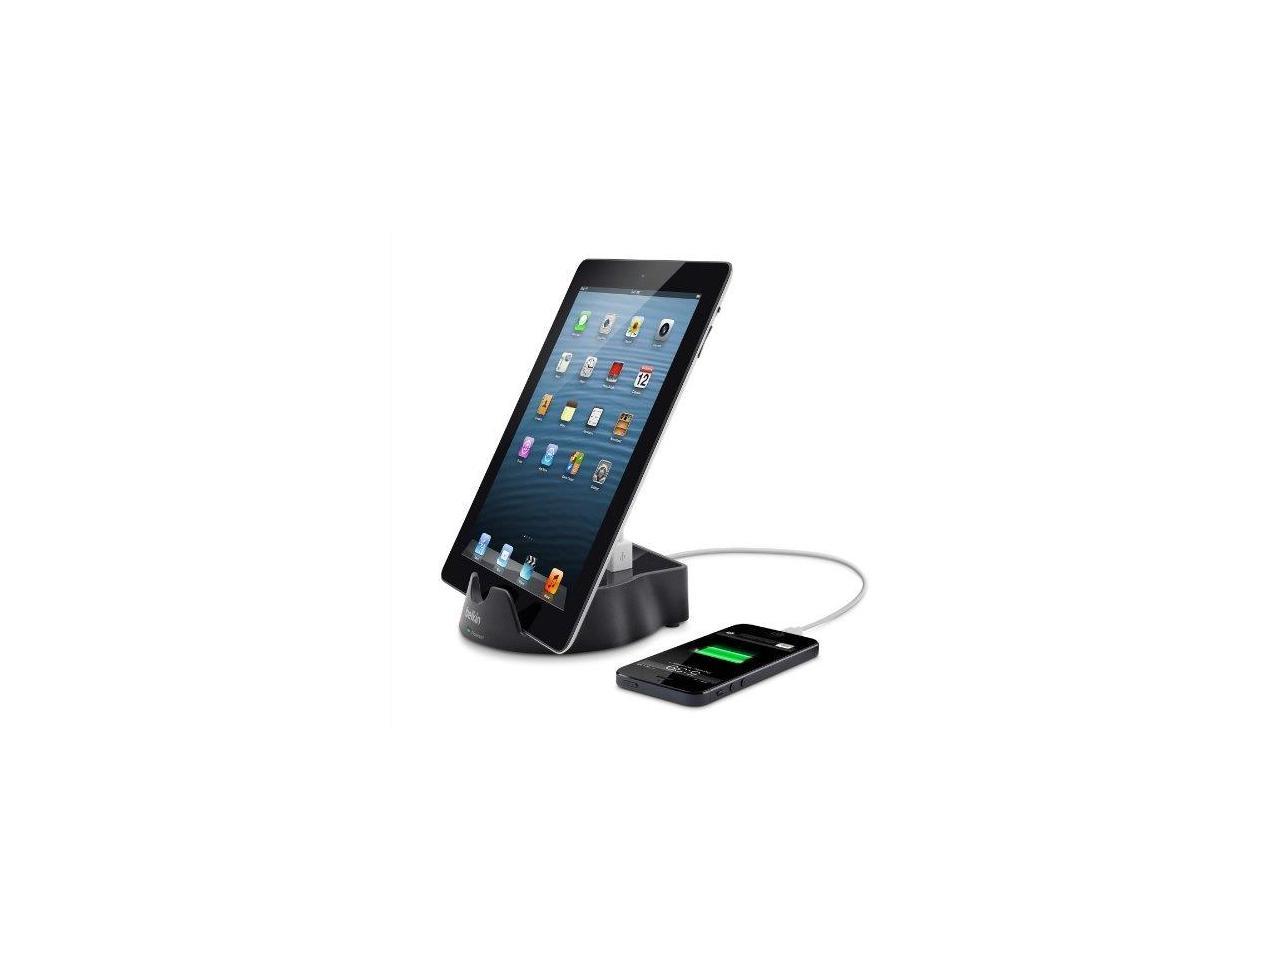 belkin surgeplus surge protector and stand for smartphones and tablets with 2 ac outlets and 2 usb ports (2.1 amp combined)